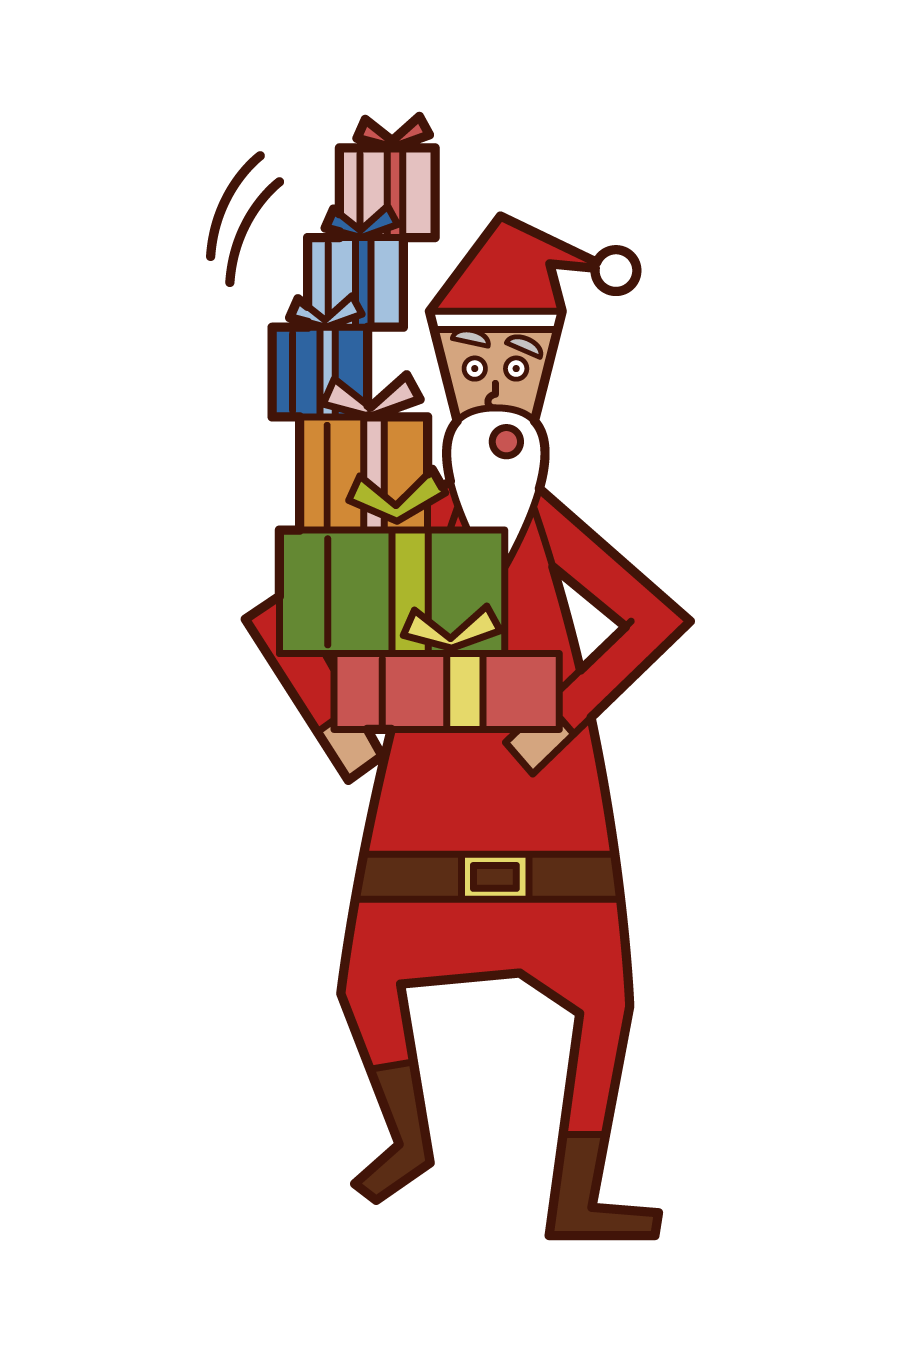 Illustration of Santa Claus with a lot of presents